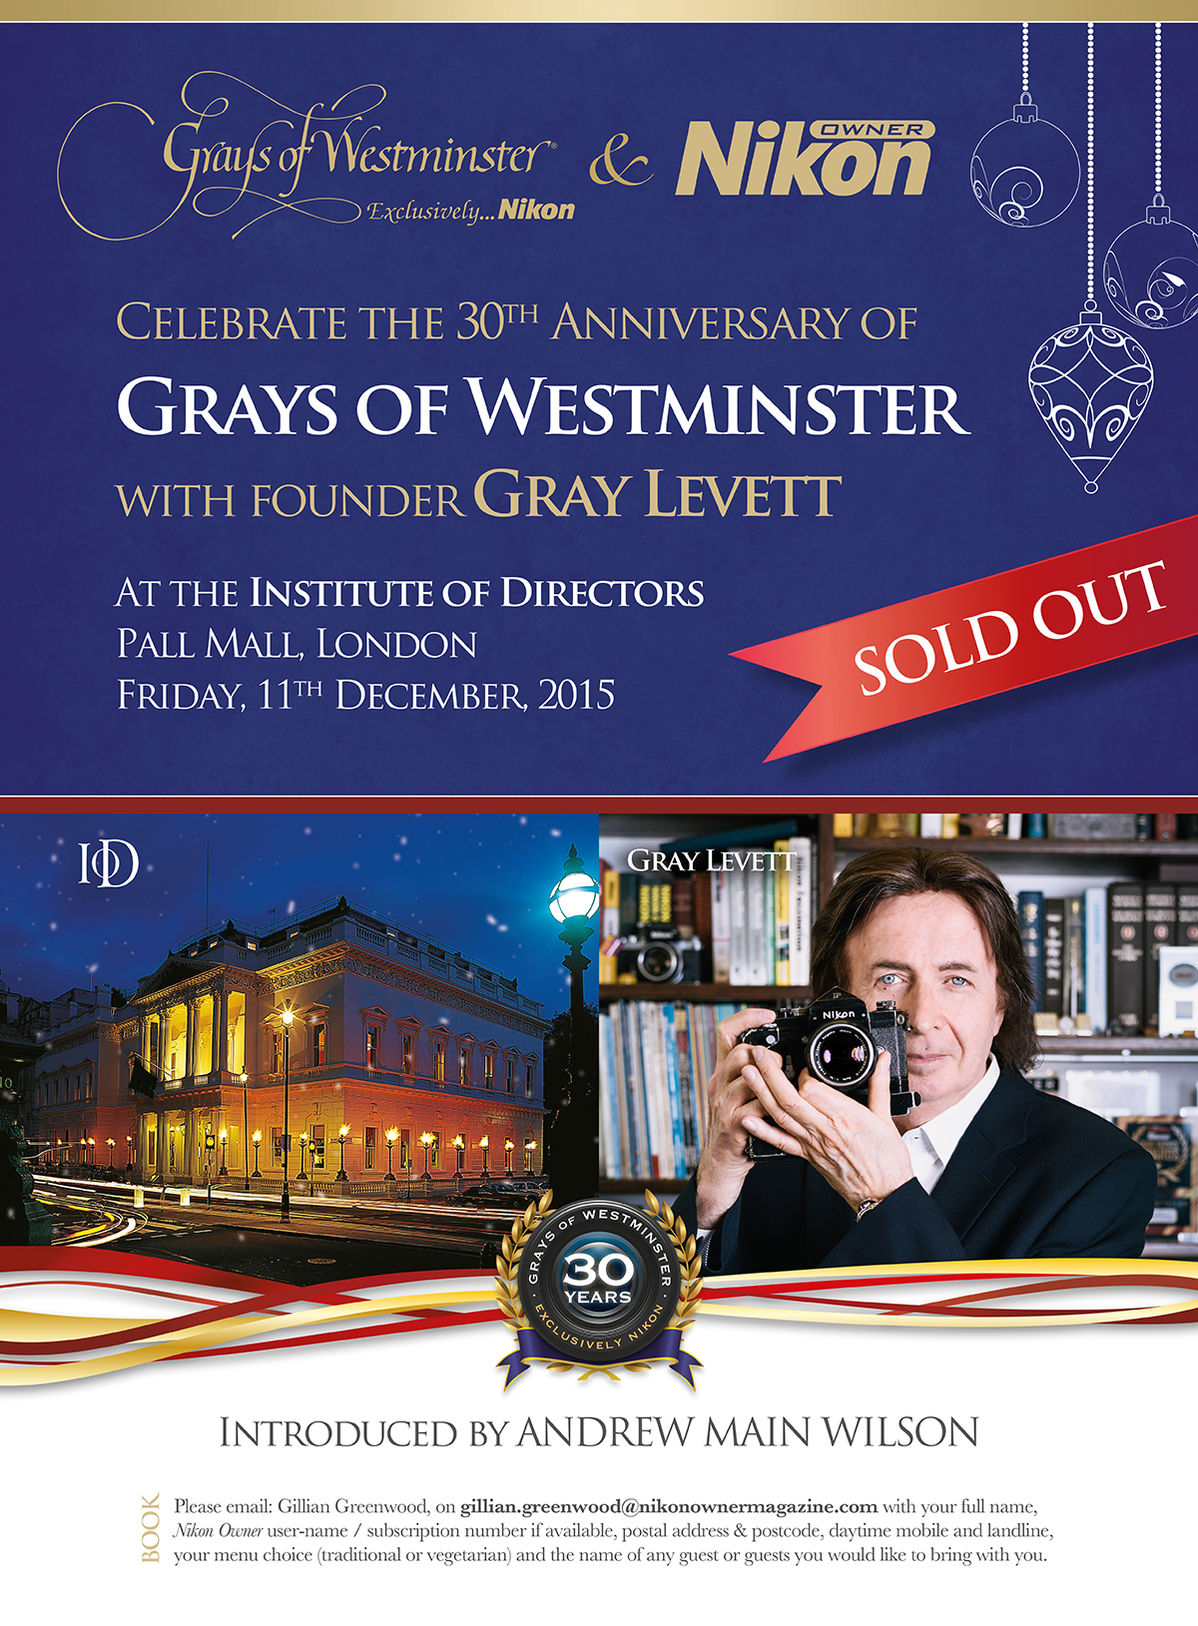 Celebrate the 30th Anniversay of Grays of Westminter with Founder Gray Levett